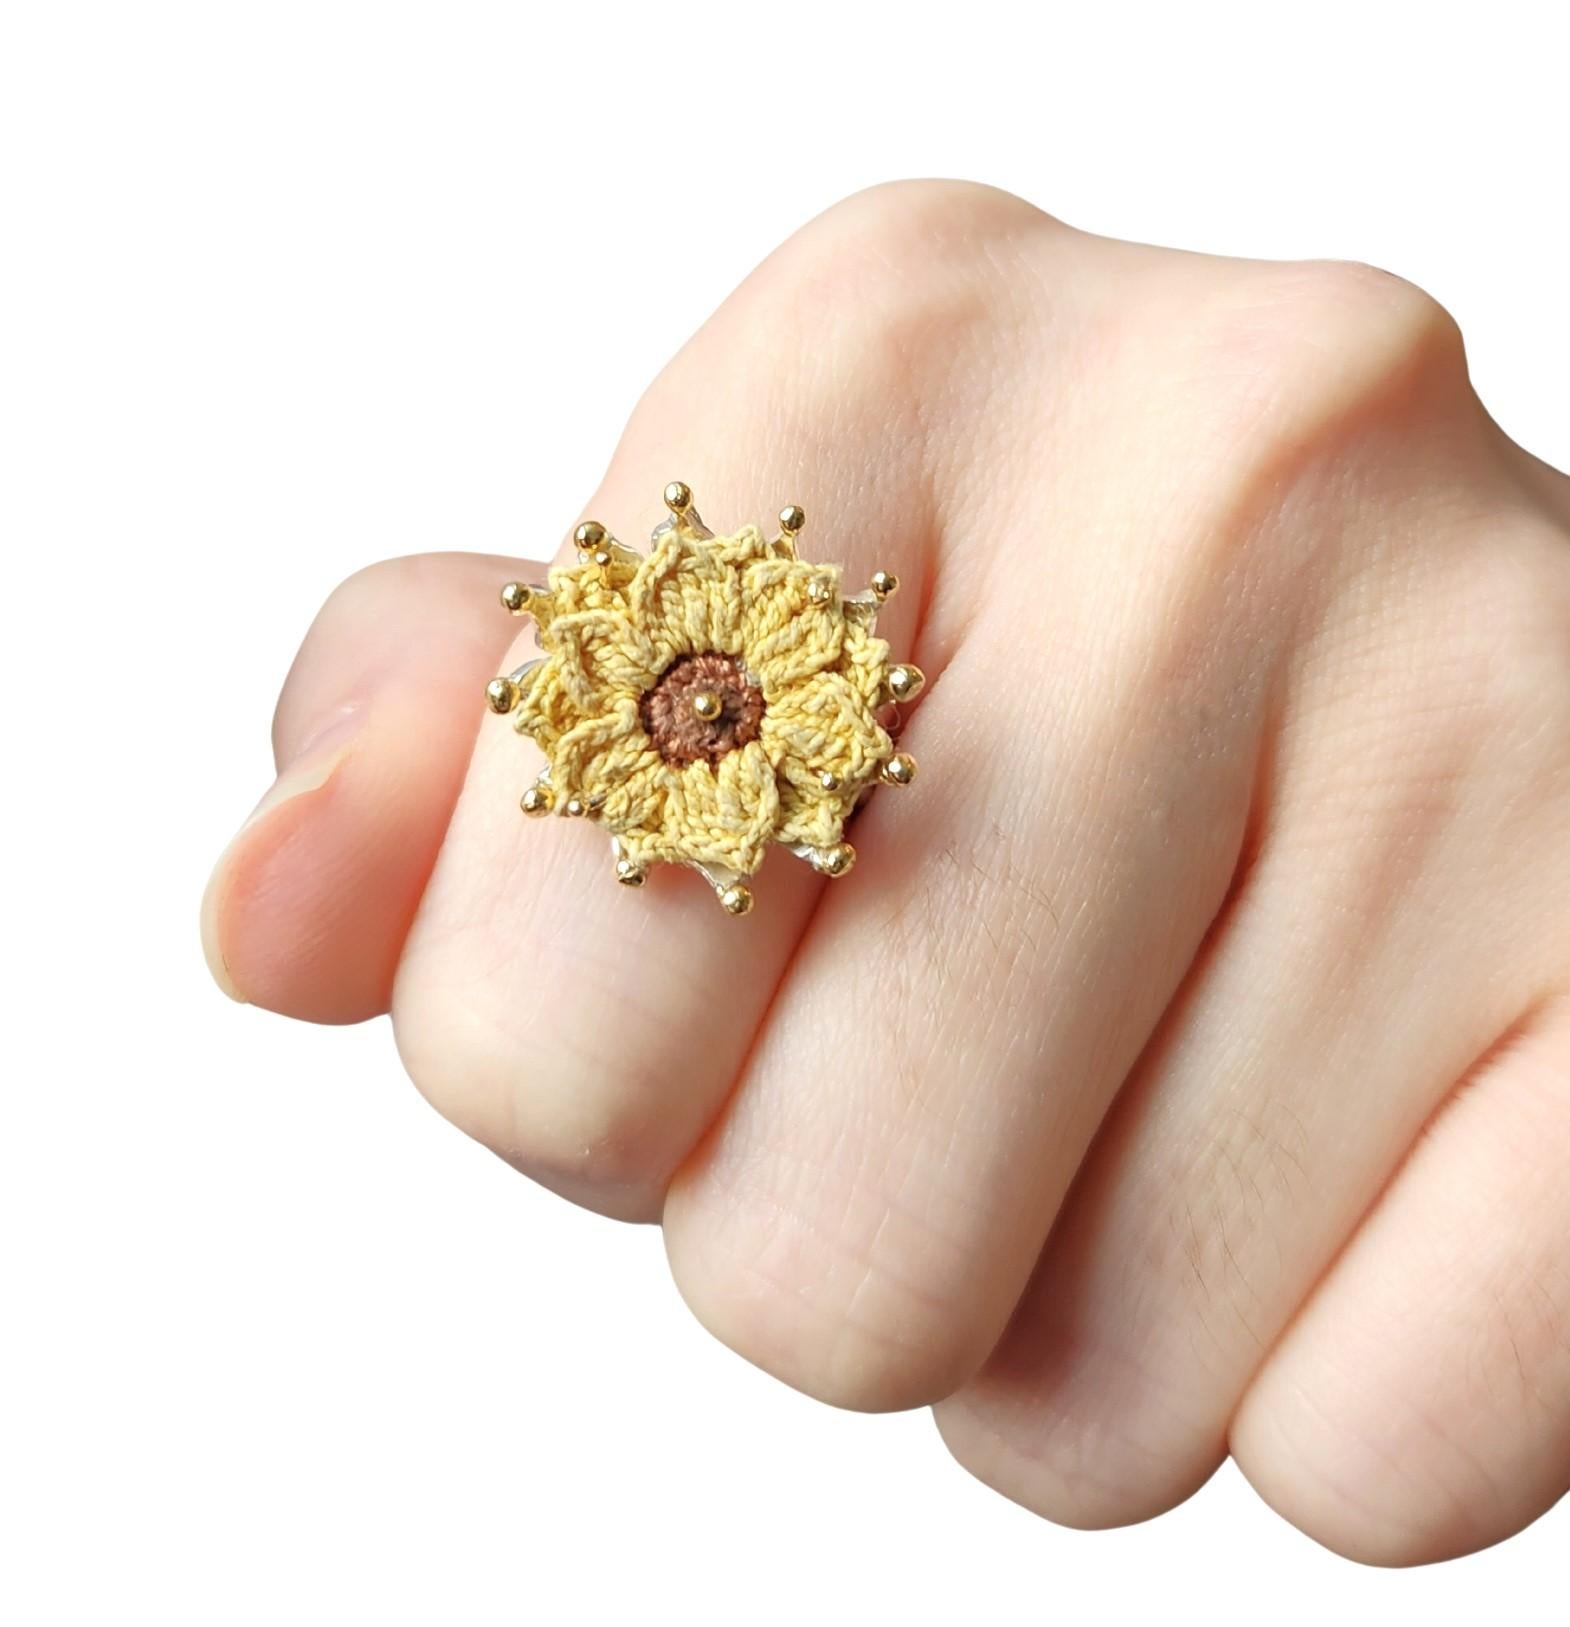 A small collection of handknit spring flowers that are a component part of a handmade ring it sits on. Each flower is a one of a kind. Gold accents are added to tips of the petals. Each knit flower and ring is custom made to fit the silhouette of